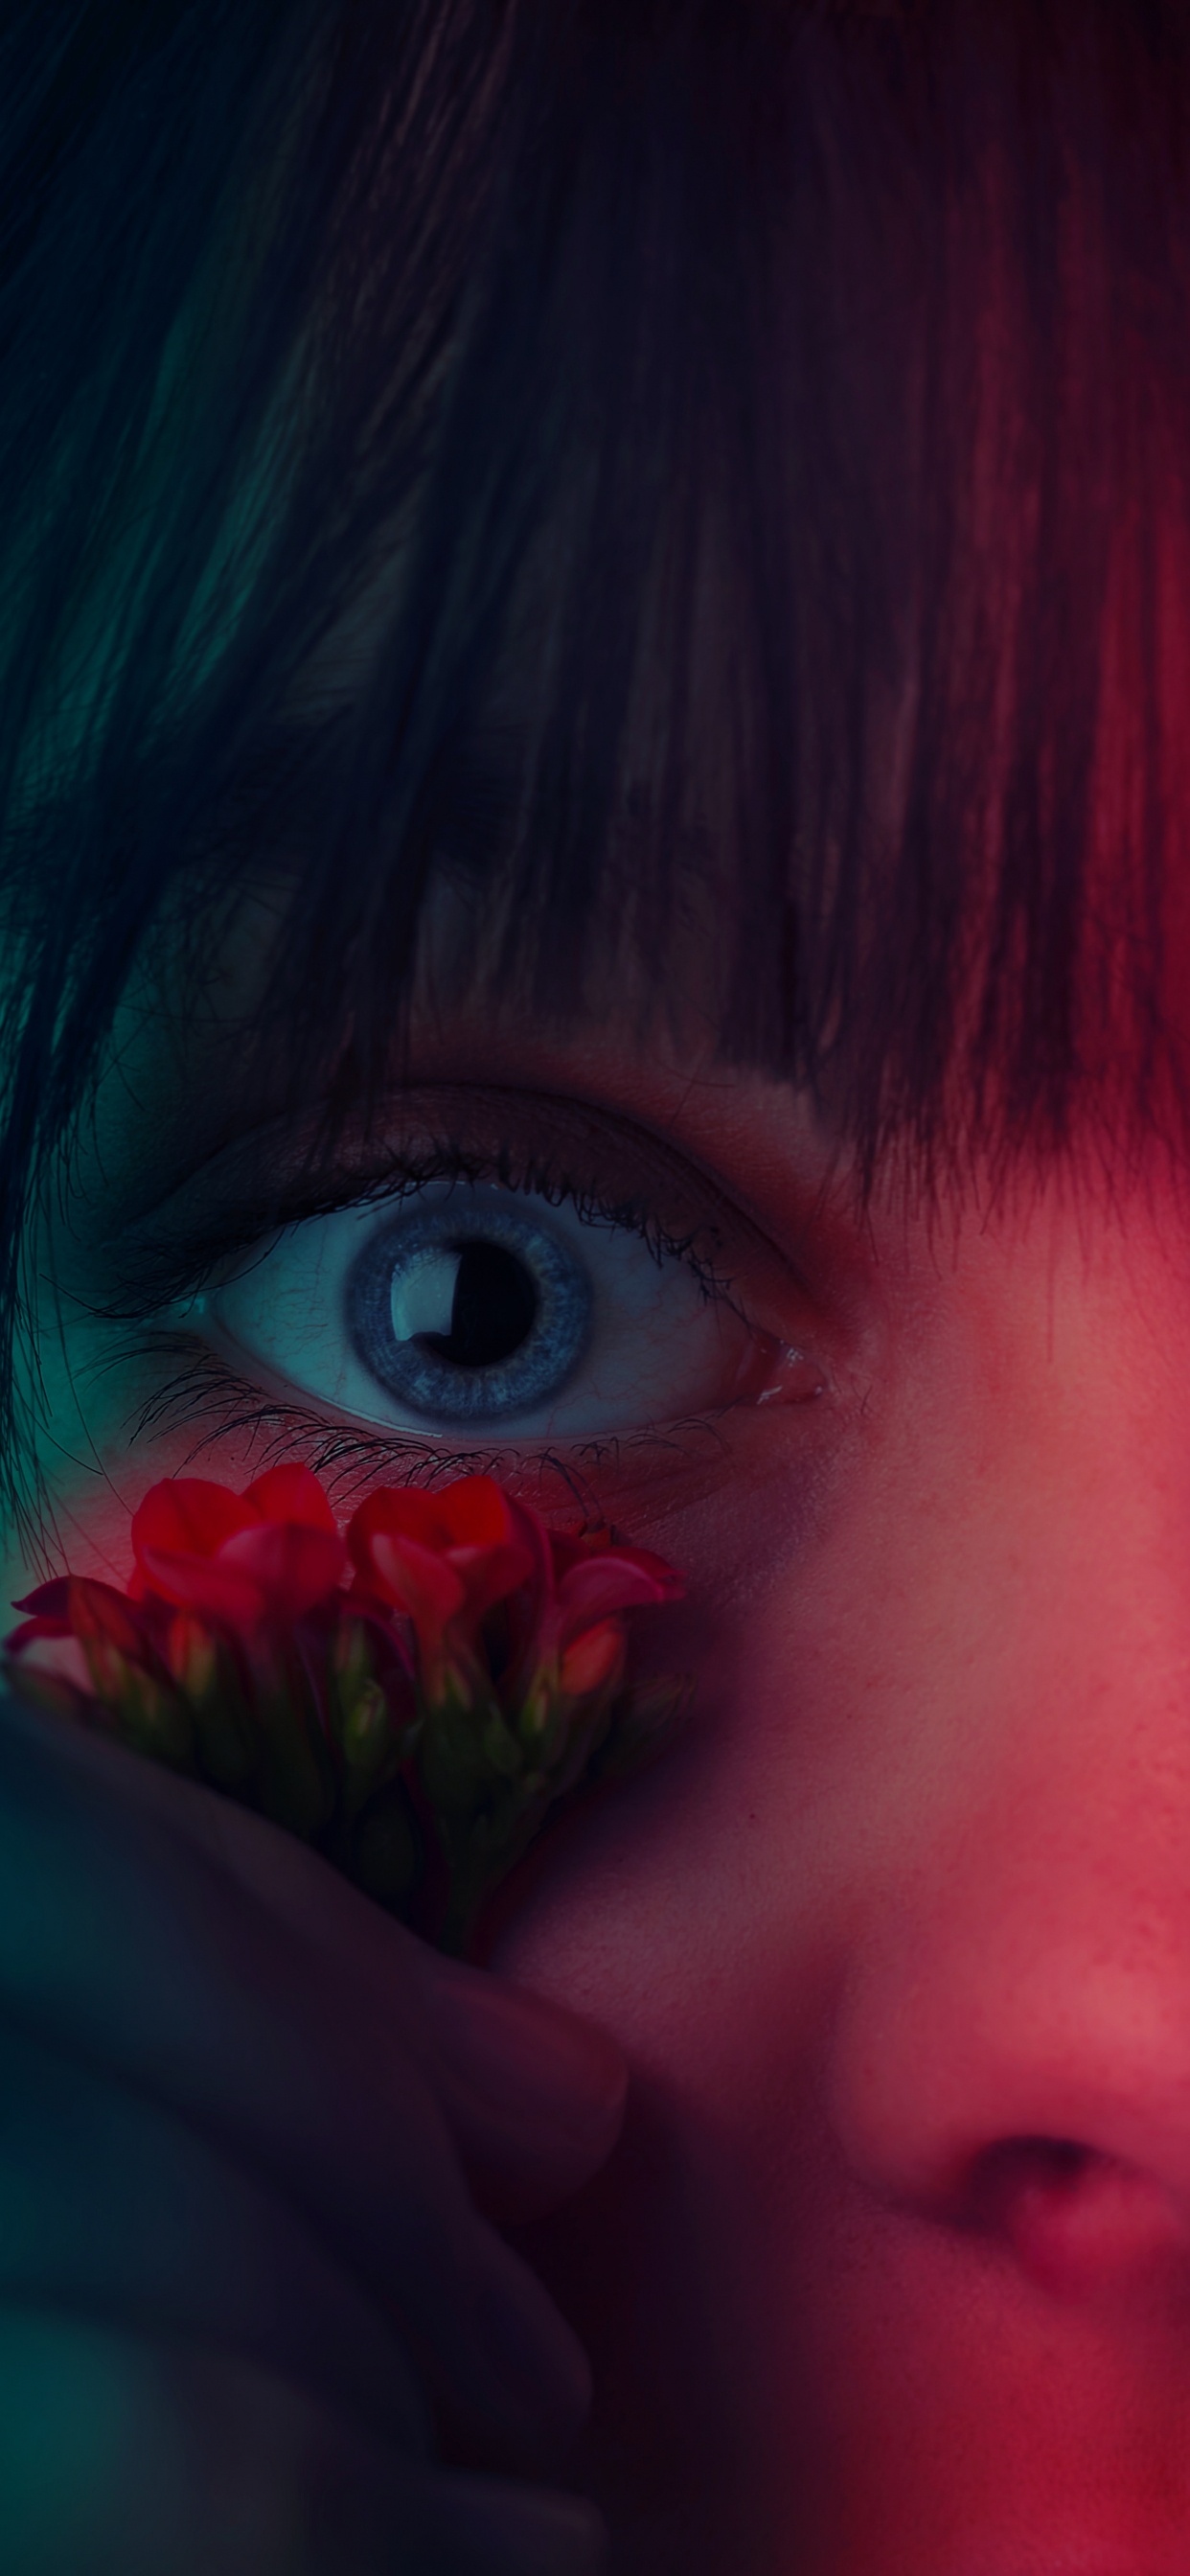 Girl With Red Flower on Her Face. Wallpaper in 1242x2688 Resolution